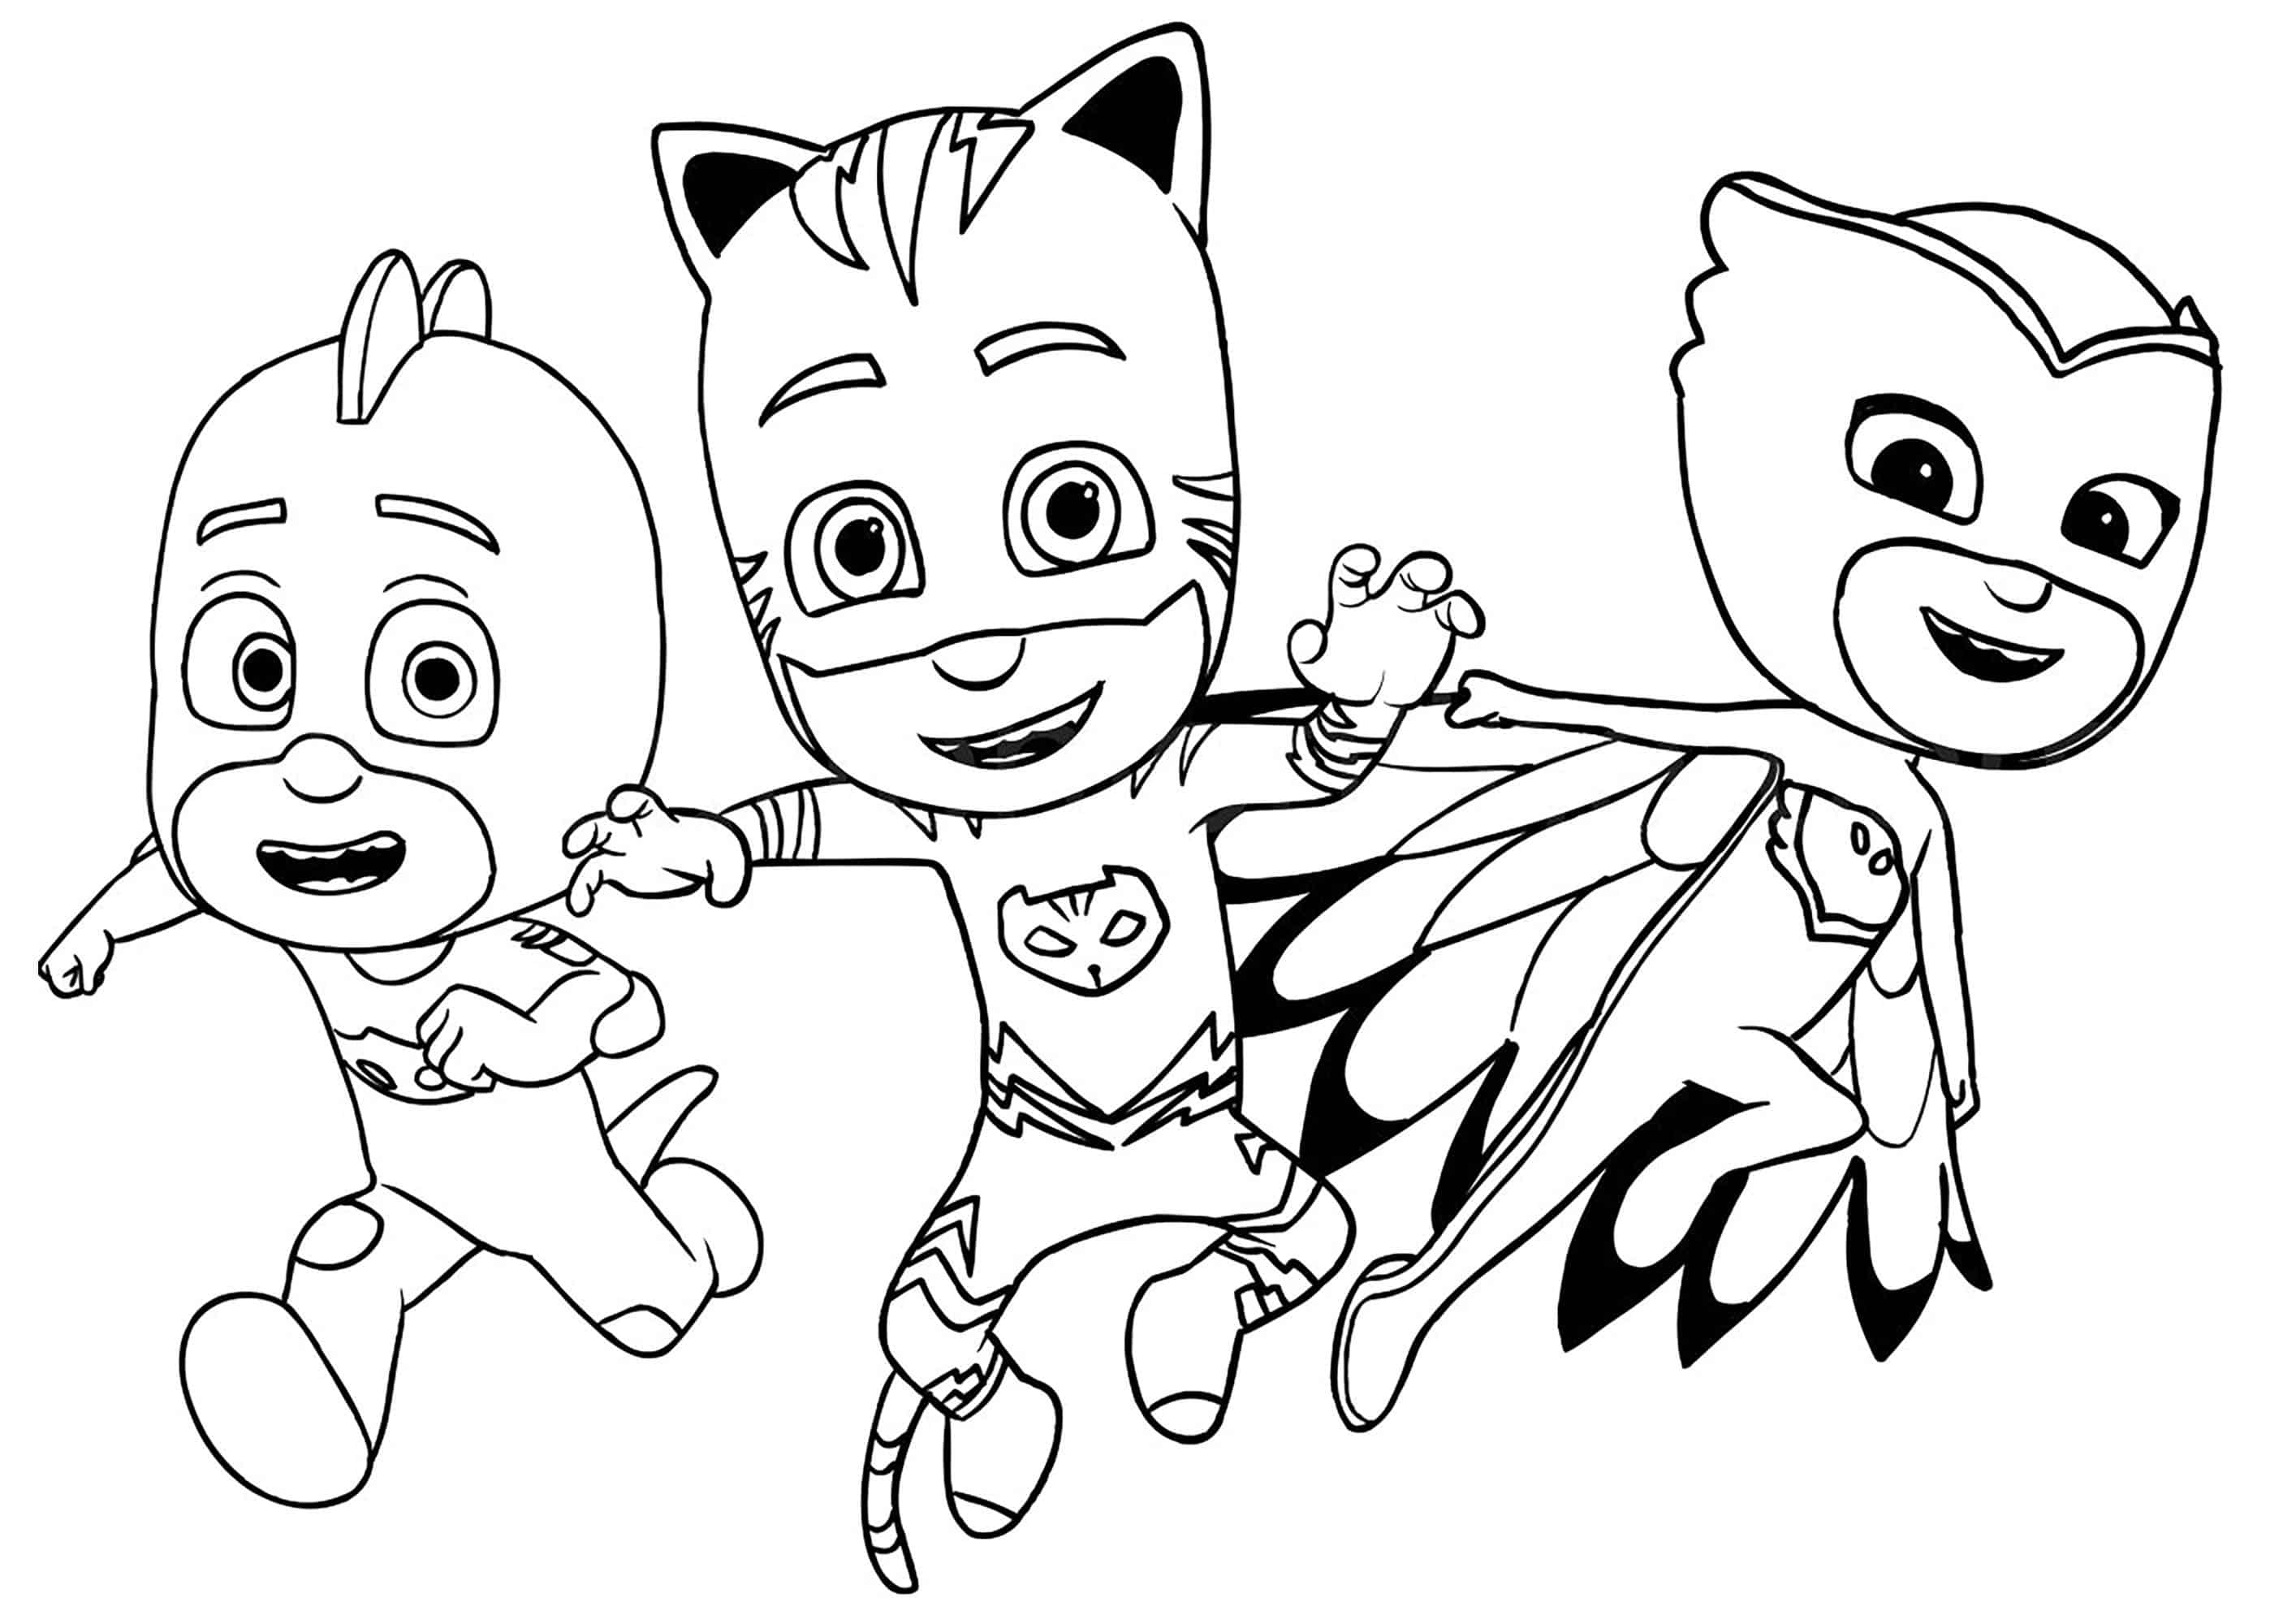 PJ Masks Heroes Colouring Page